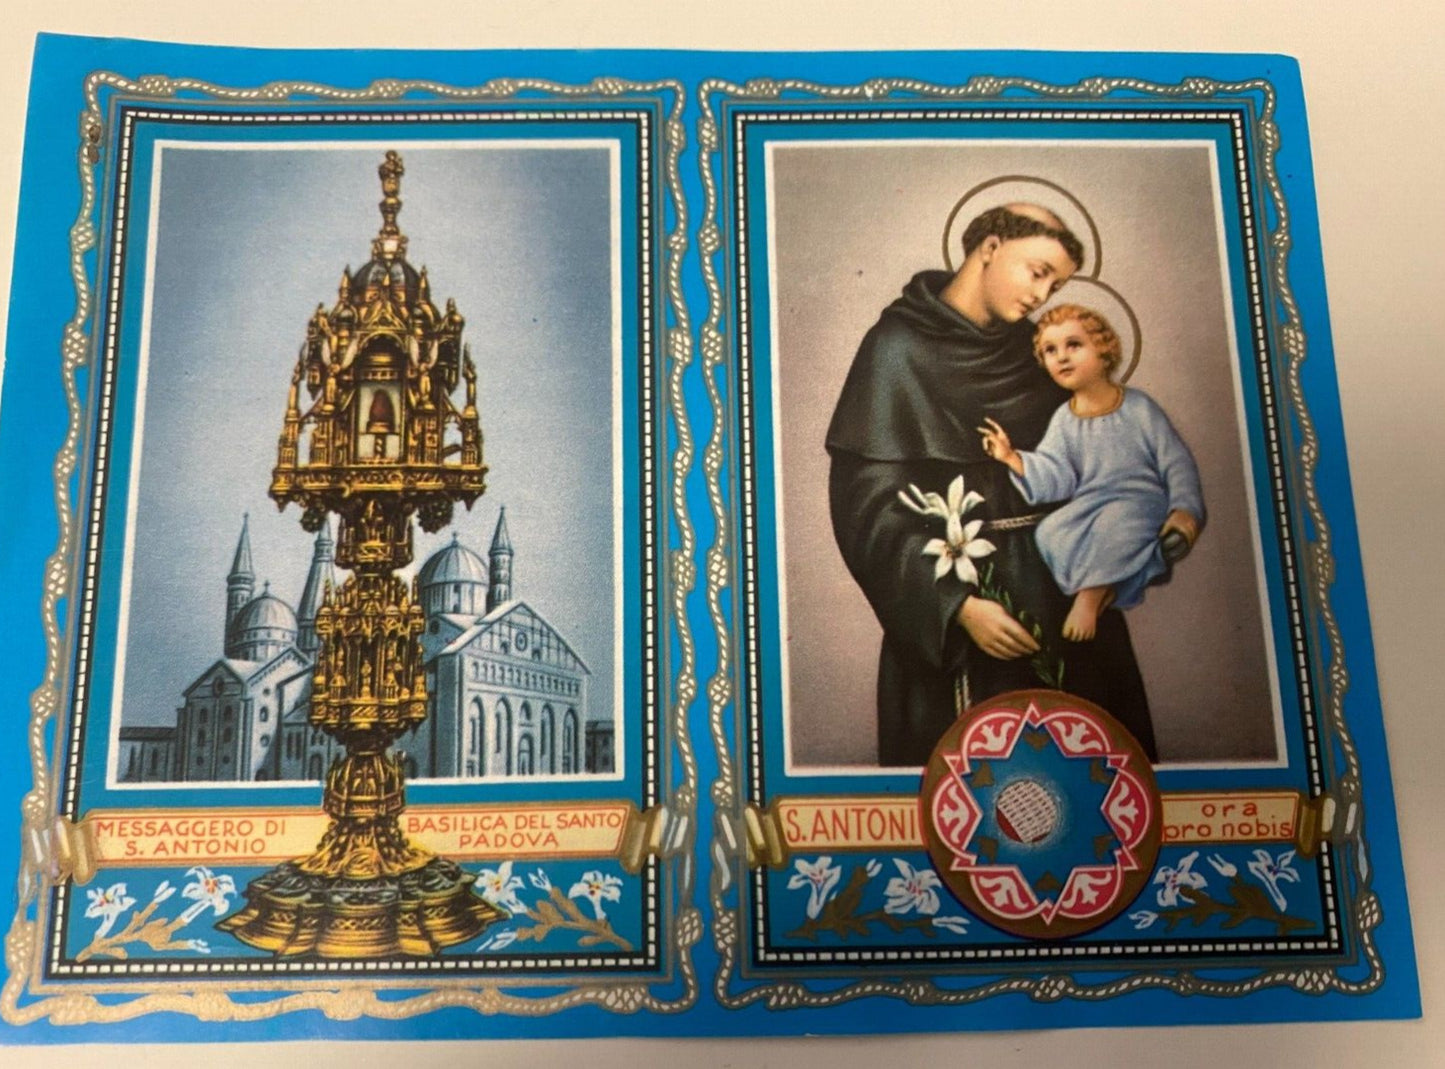 Saint Anthony 3rd Class Relic/Prayer Card Folder, New from Italy - Bob and Penny Lord